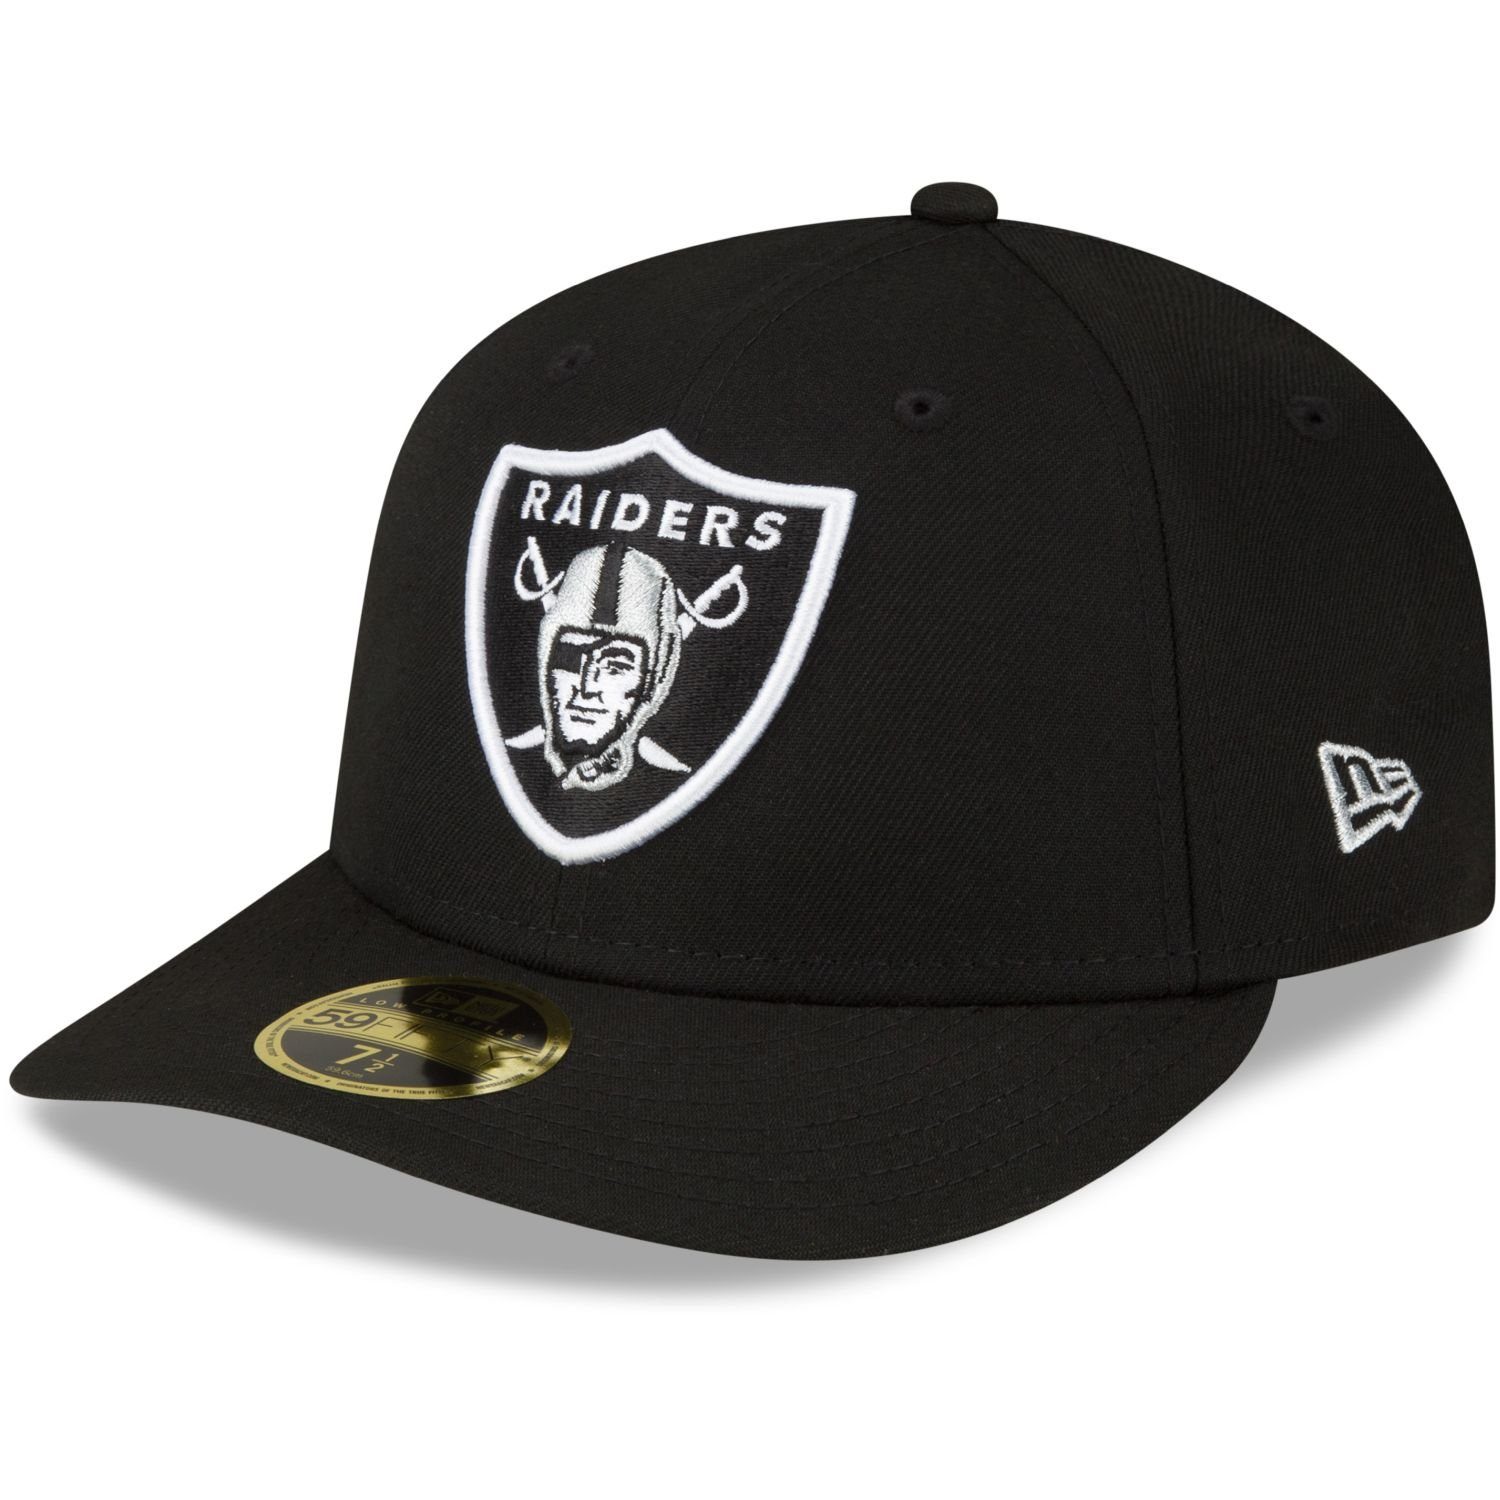 New Era Fitted Cap 59Fifty LOW Las Vegas PROFILE Raiders NFL